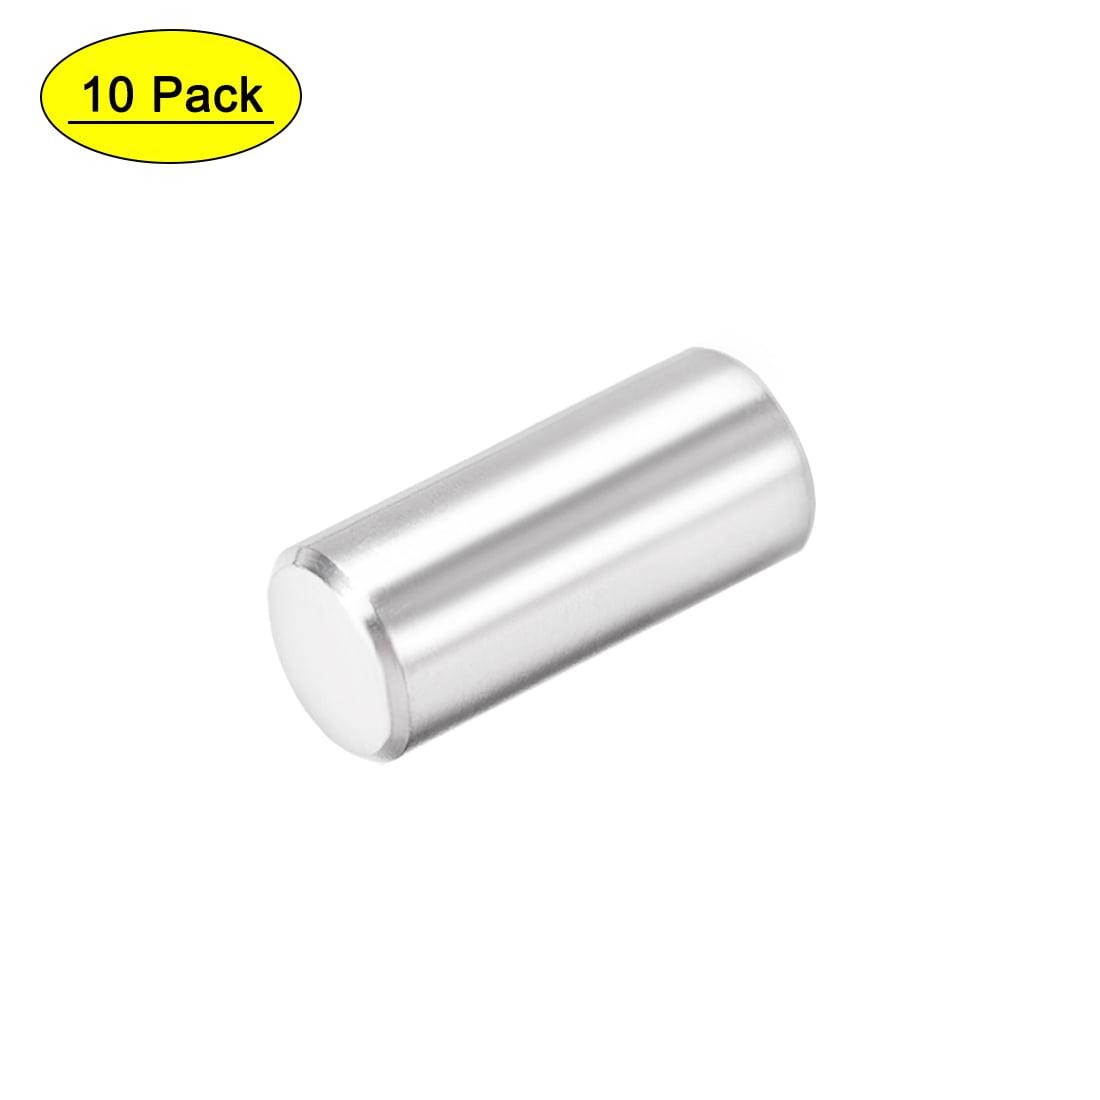 M4 M5 Metric Stainless Steel Dowel Pins or Locating and Retaining Pins 